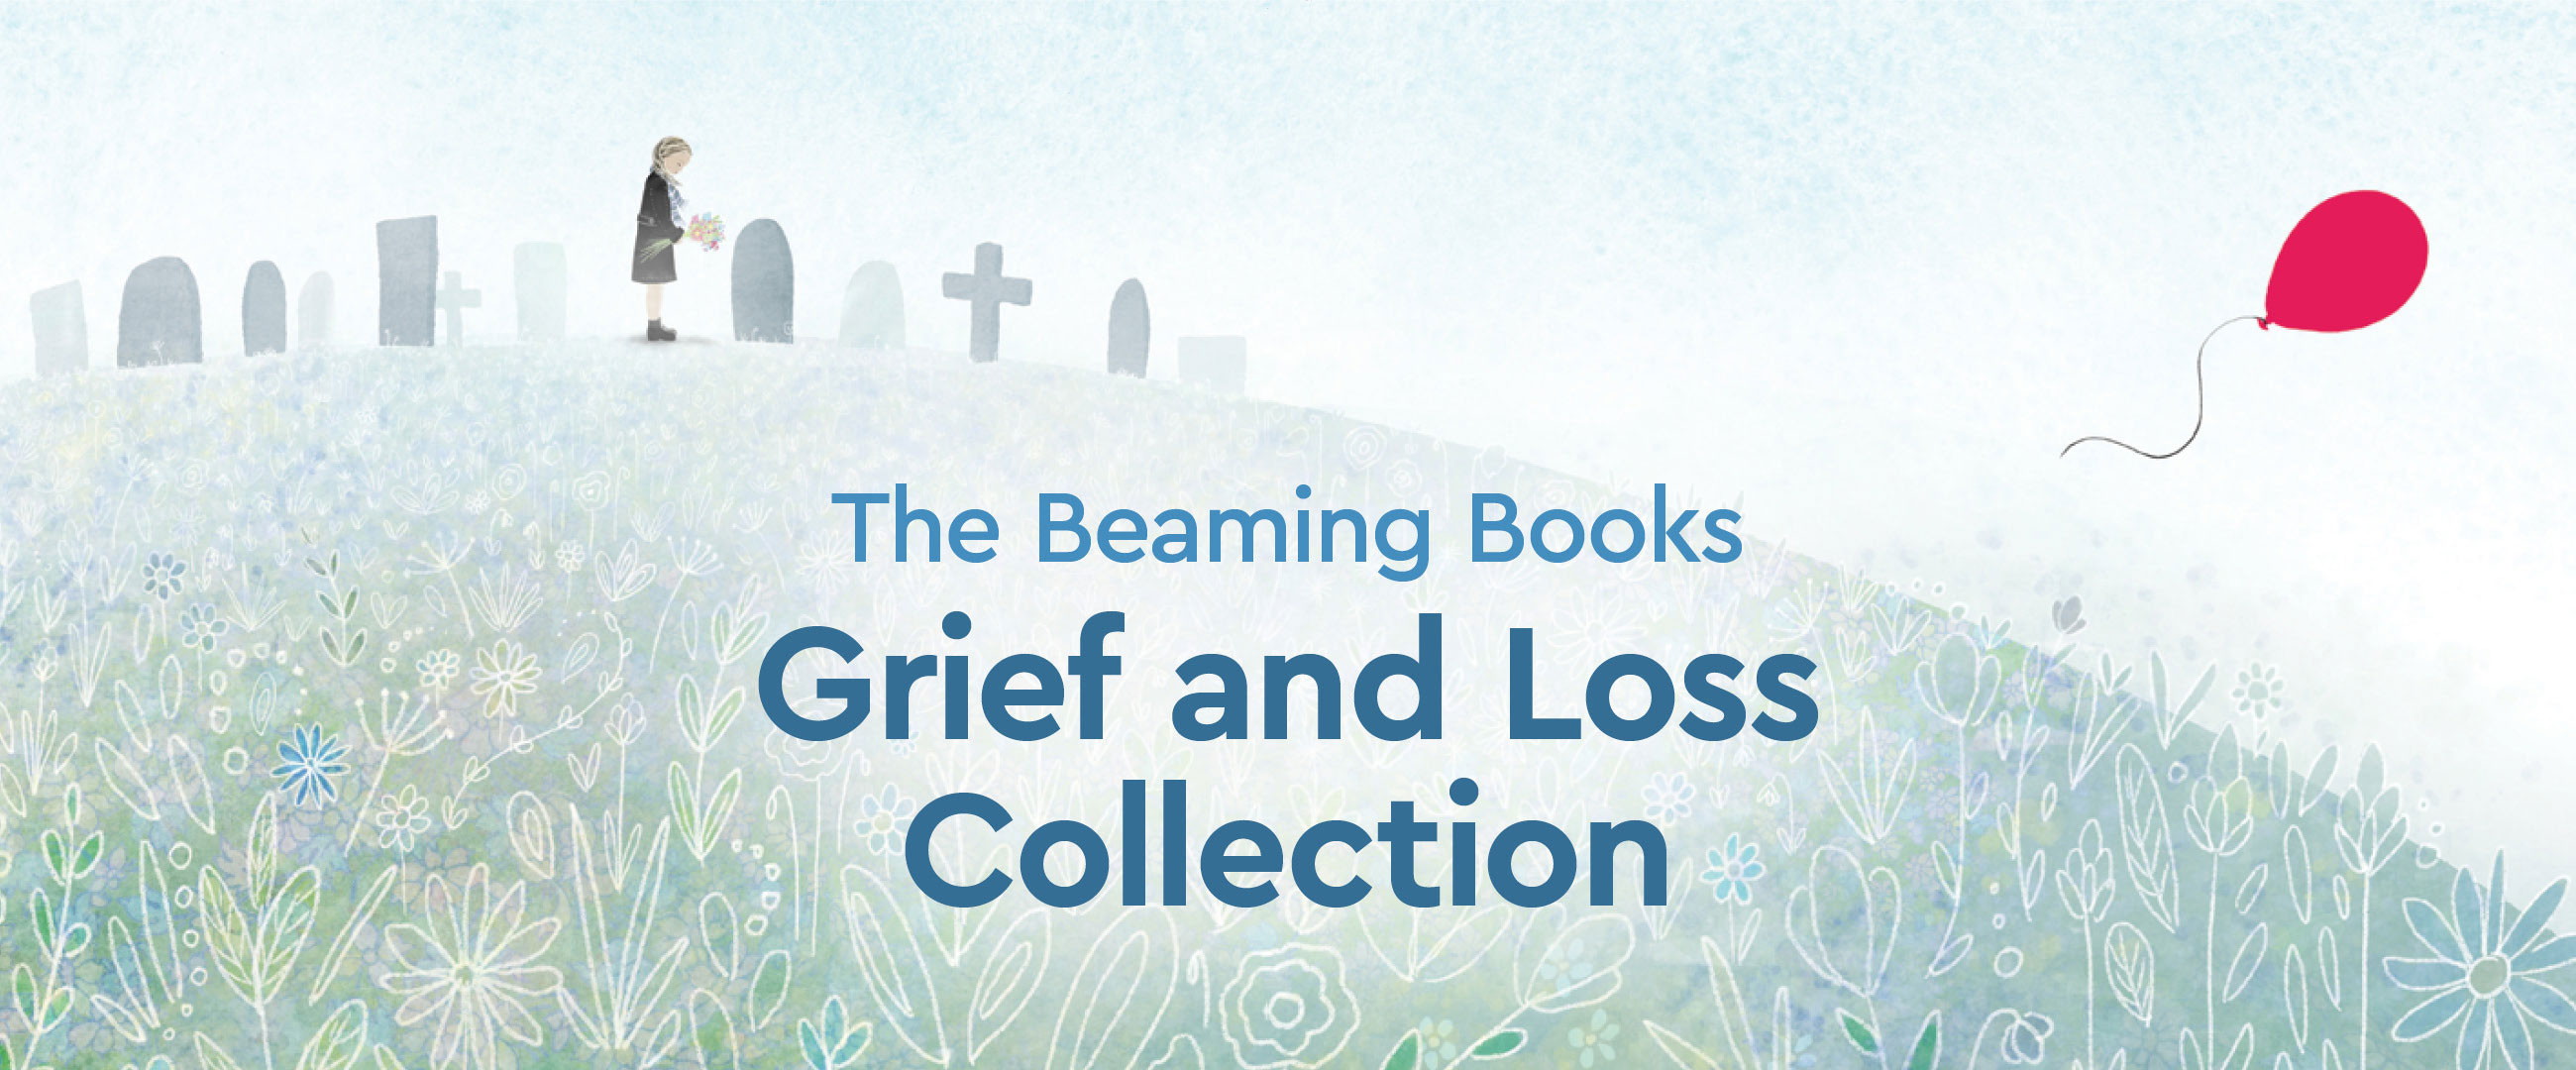 The Beaming Books Grief and Loss Collection